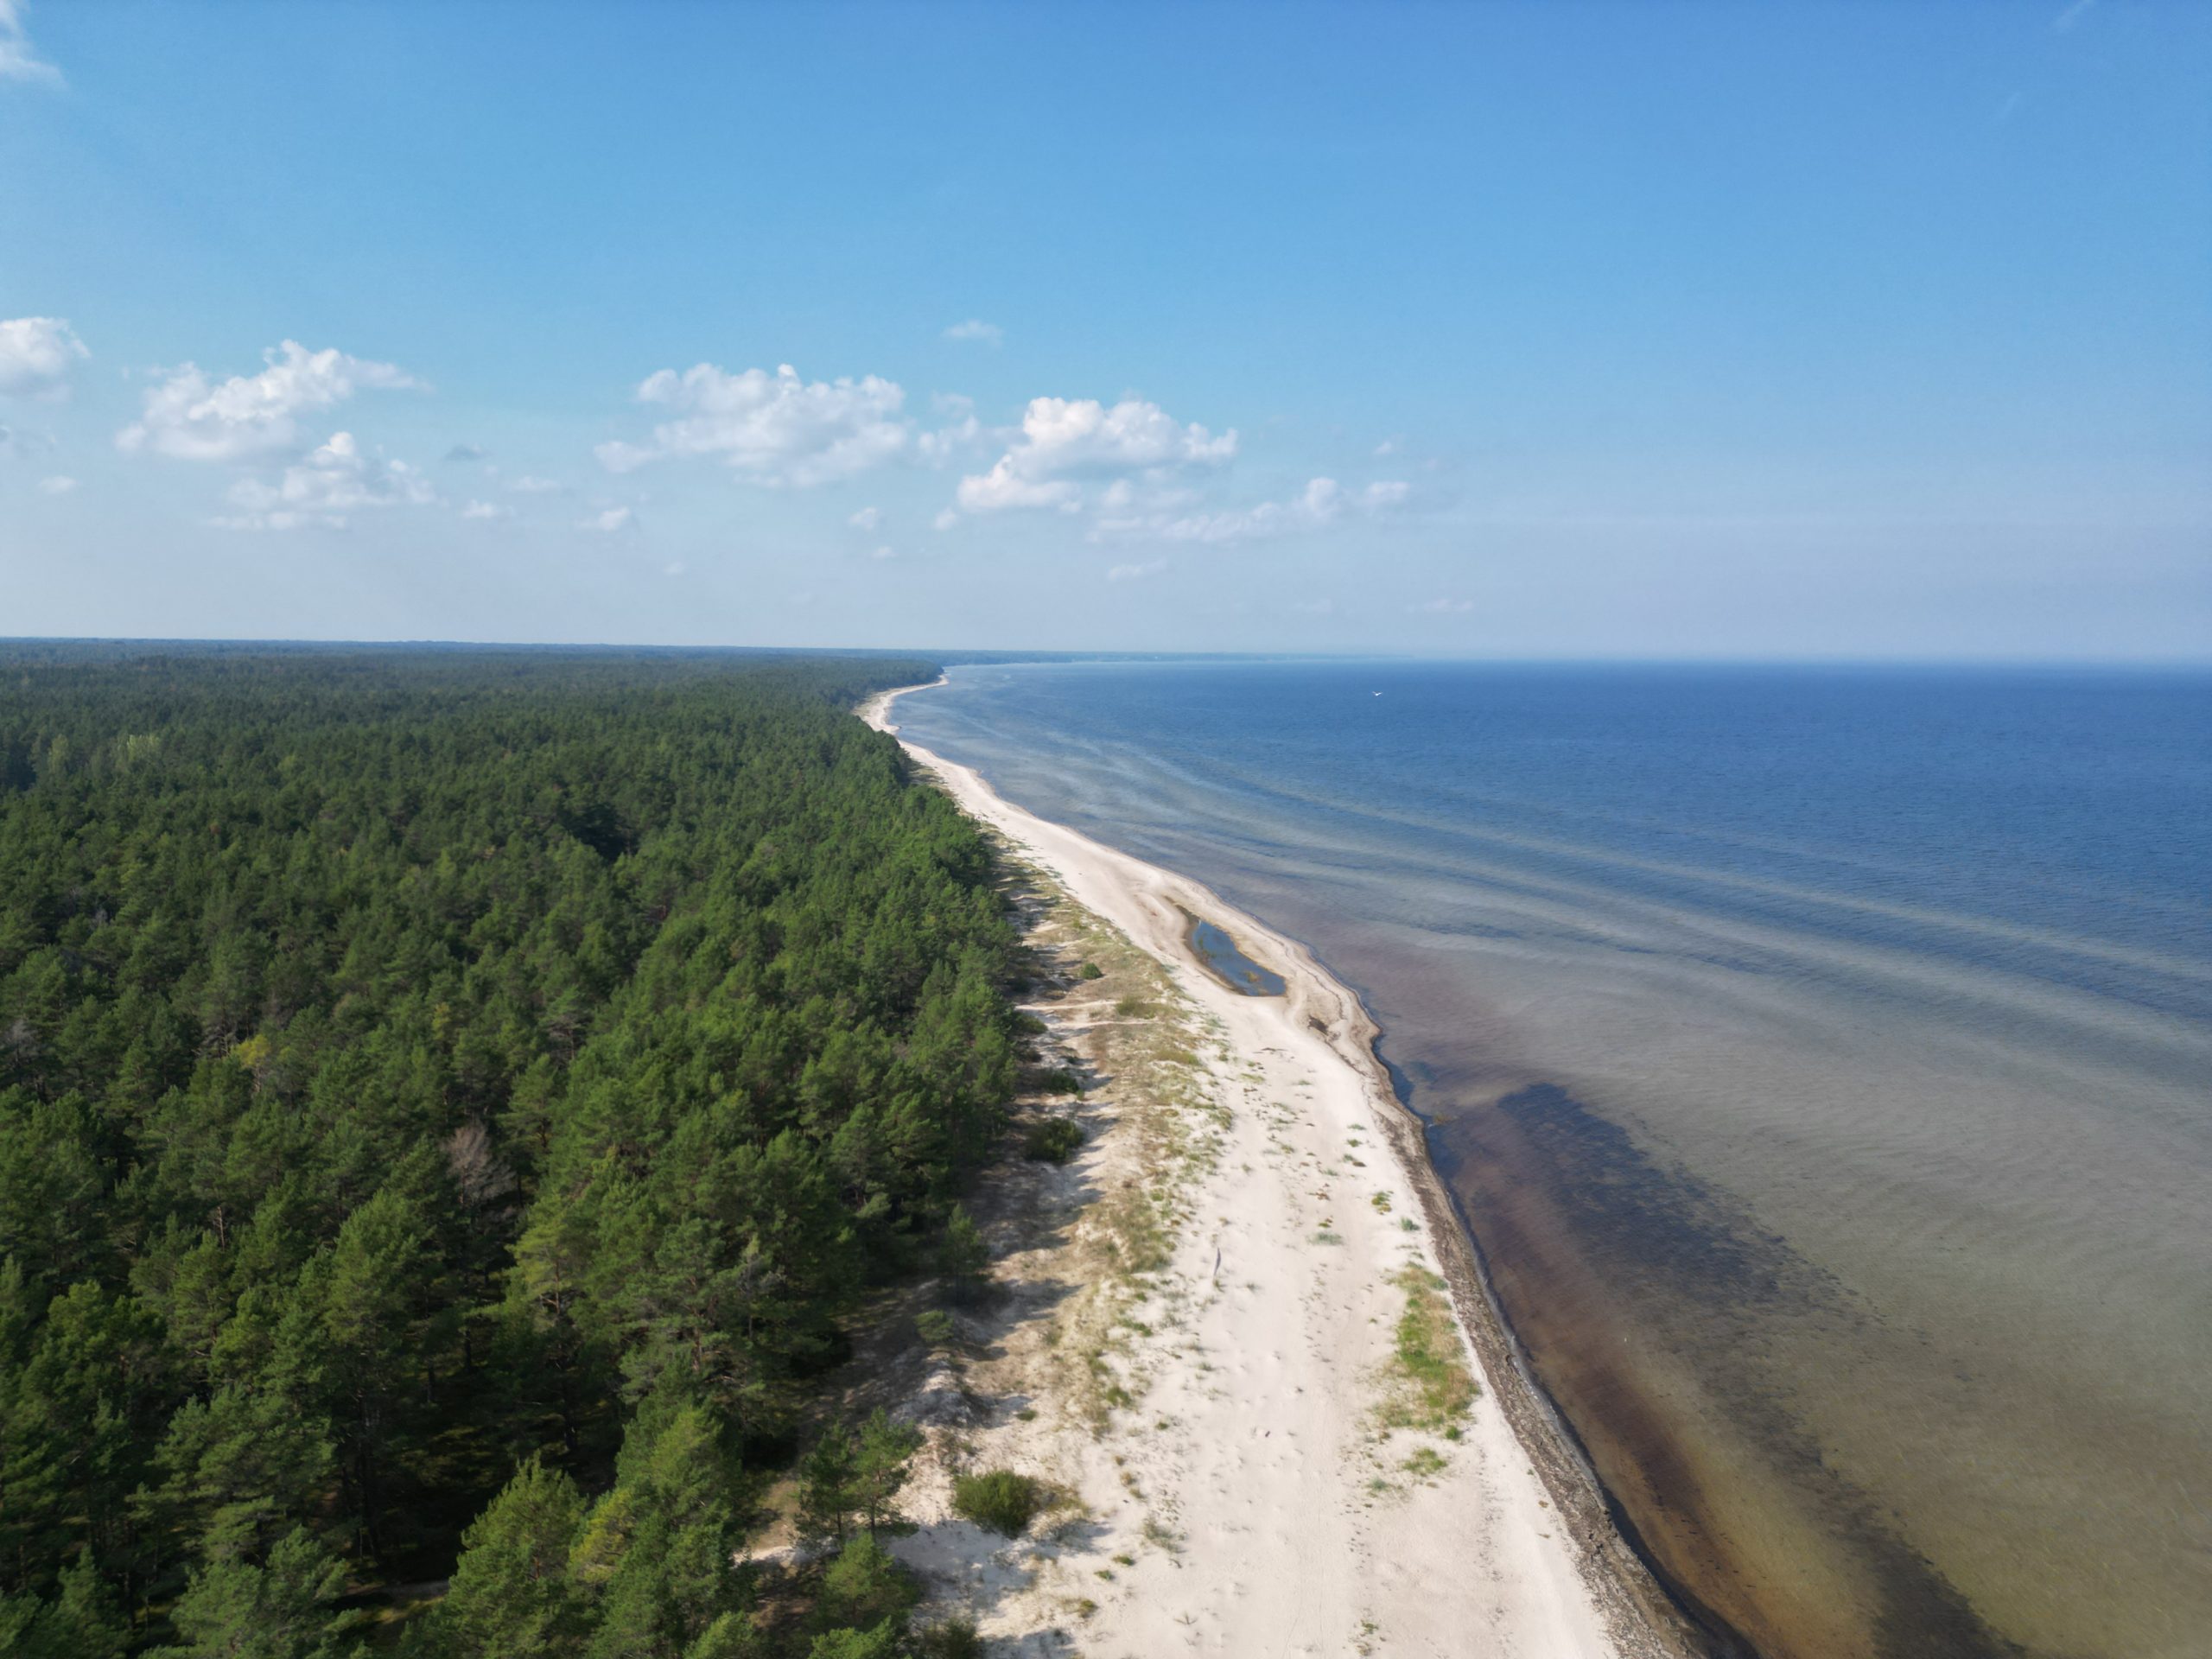 Site of the SONET coastal dune protection project in Latvia (c) BaltCF